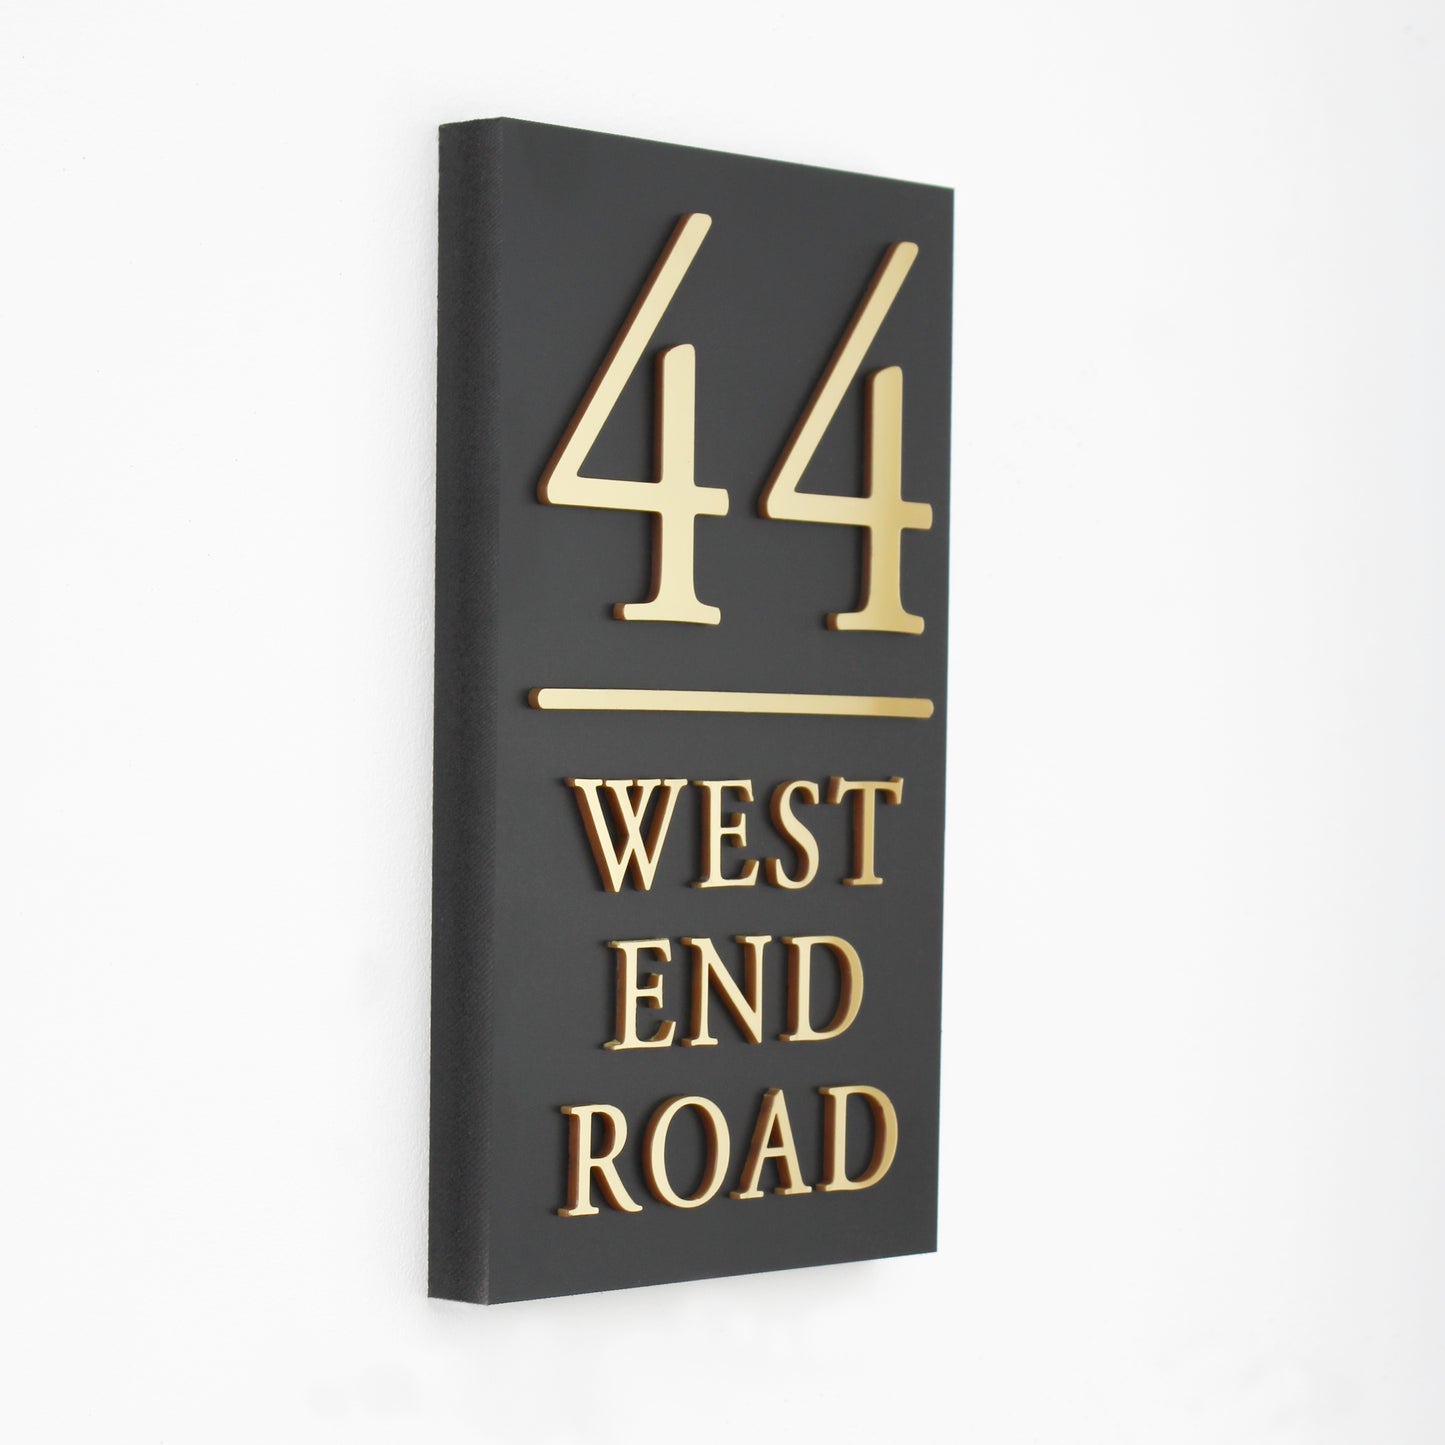 Matte Black Portrait House Sign with Parallel  Line, Available in Gold , Silver or Wood Effect Lettering